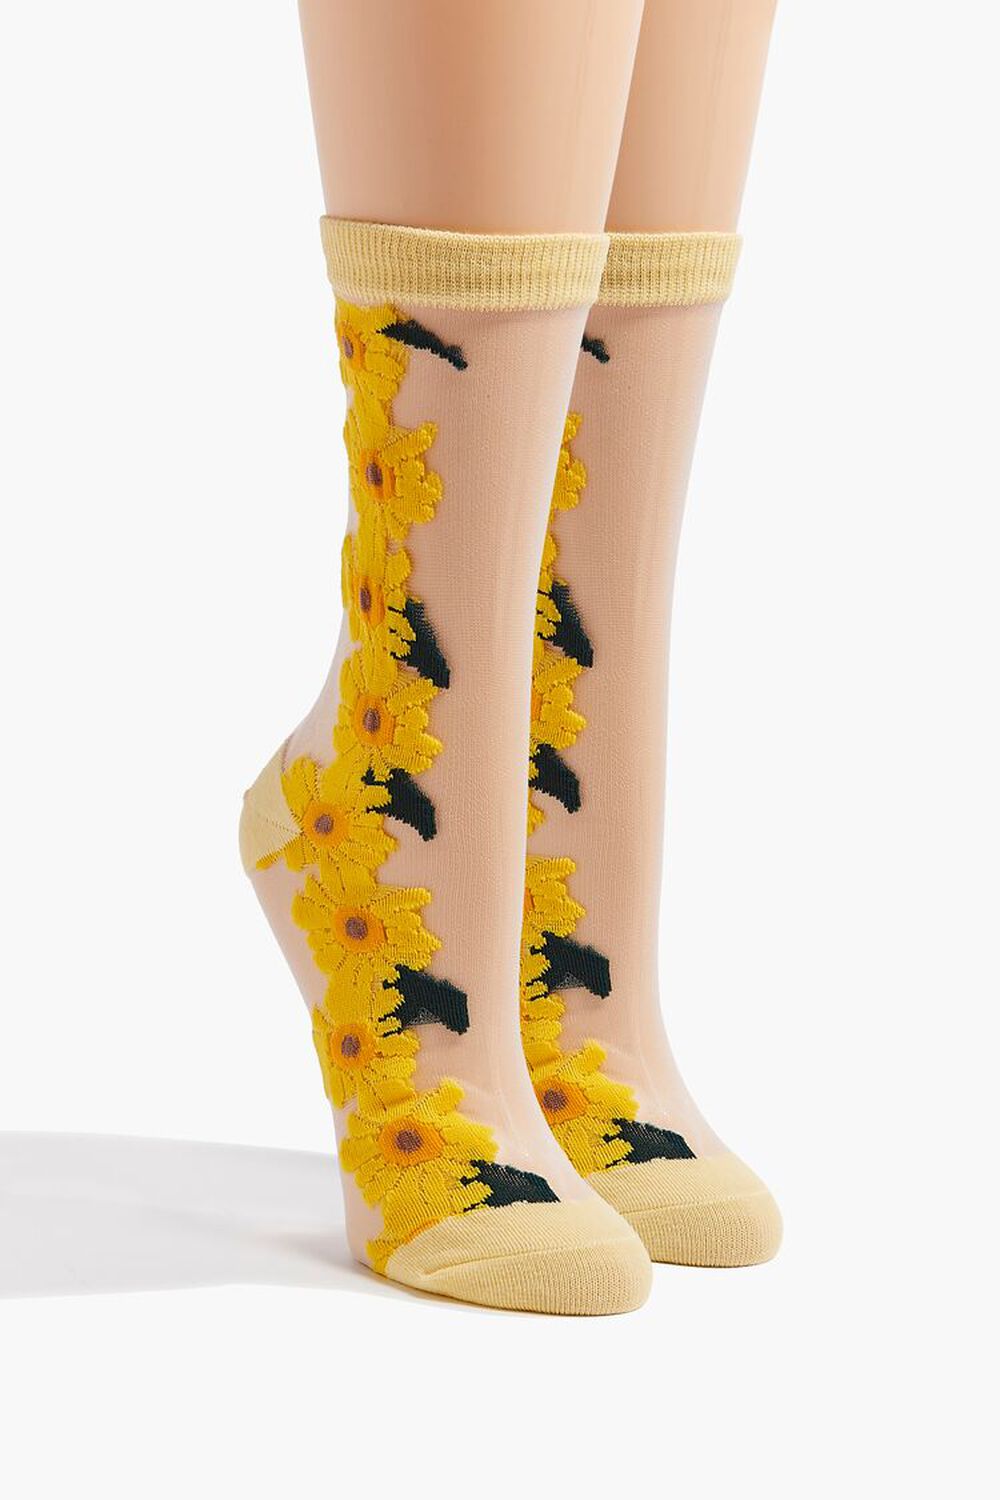 YELLOW/MULTI Embroidered Floral Mesh Crew Socks, image 1